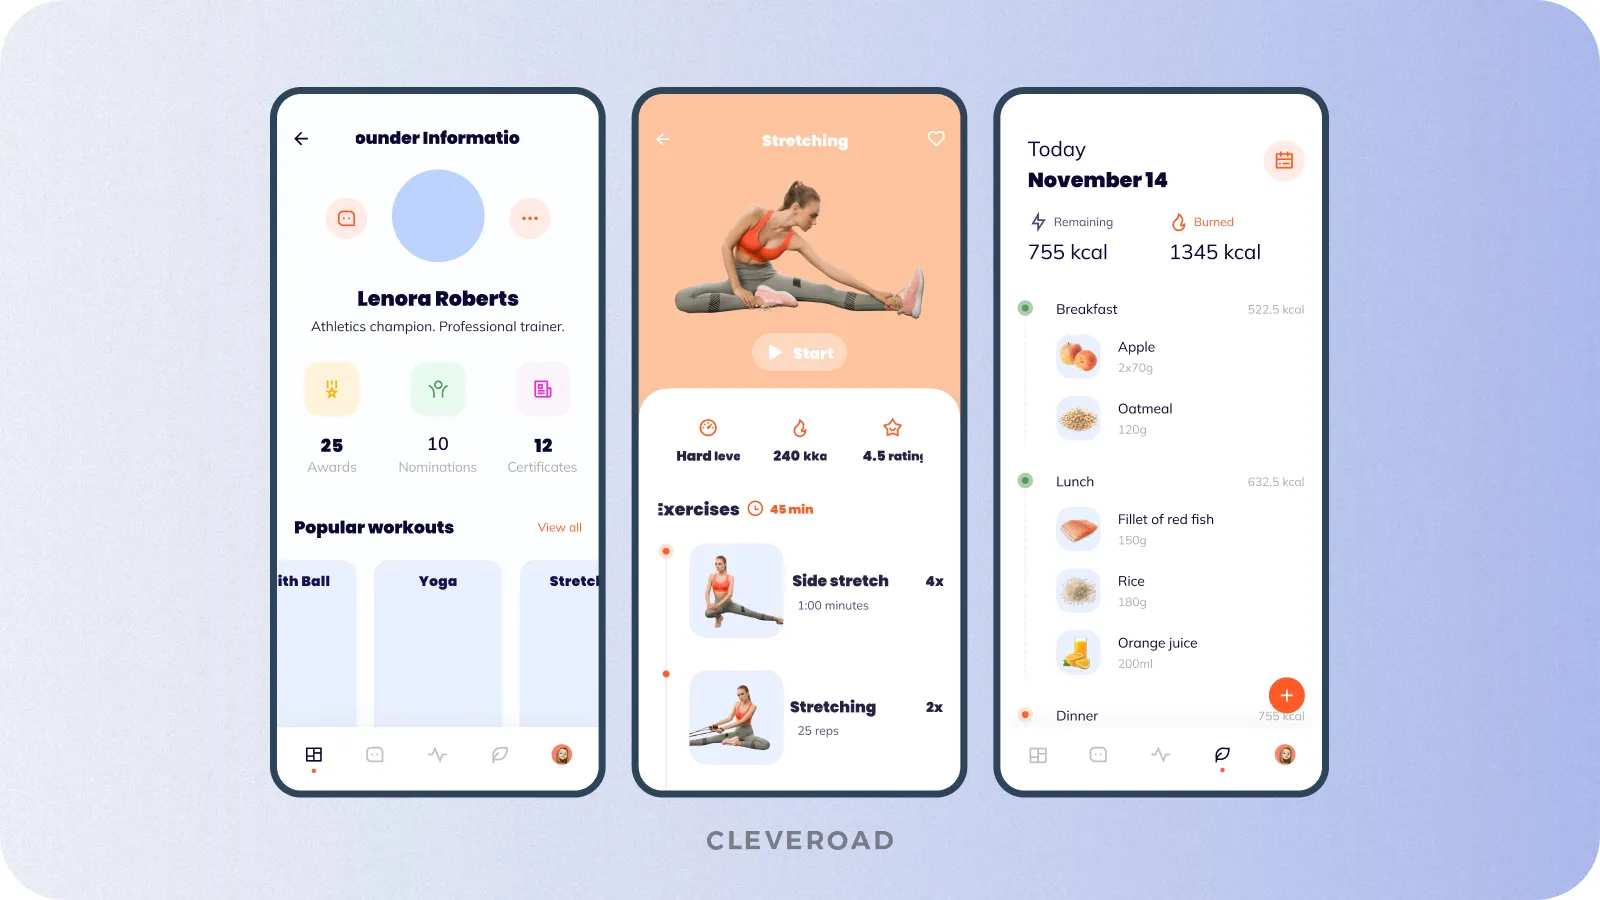 Smart coach app designed by Cleveroad